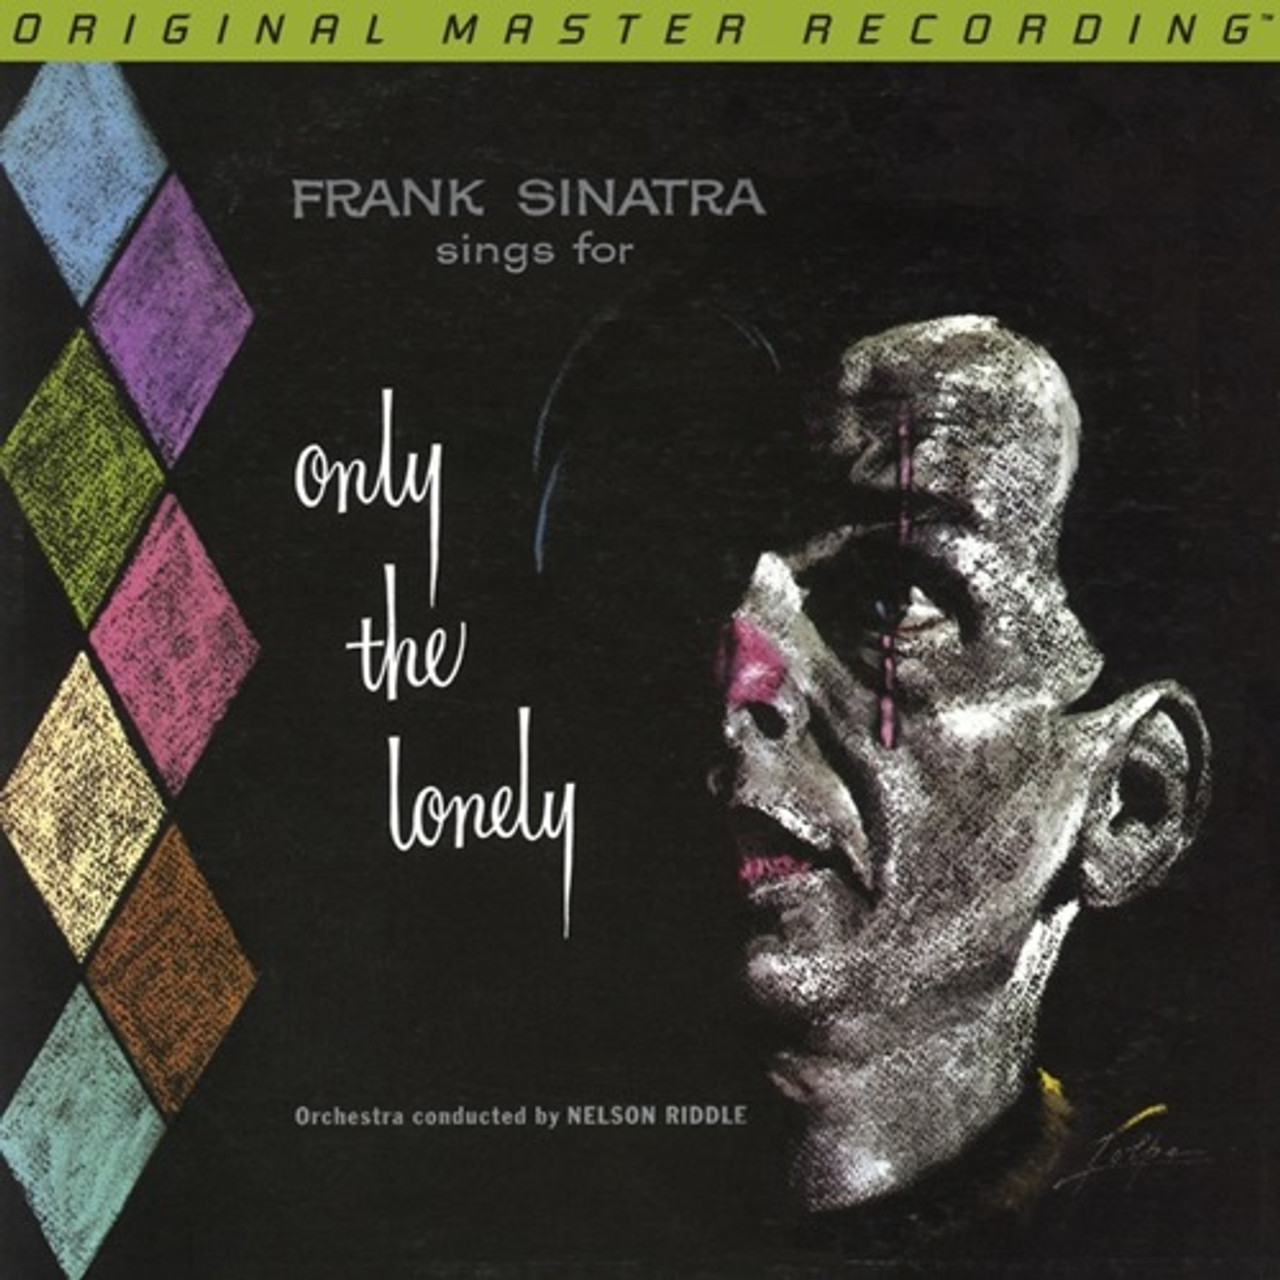 Only　For...　Sings　Gold　Frank　Mono　Frank　The　Music　Edition　Lonely　Sinatra　CD)　Direct　Sinatra　(Limited